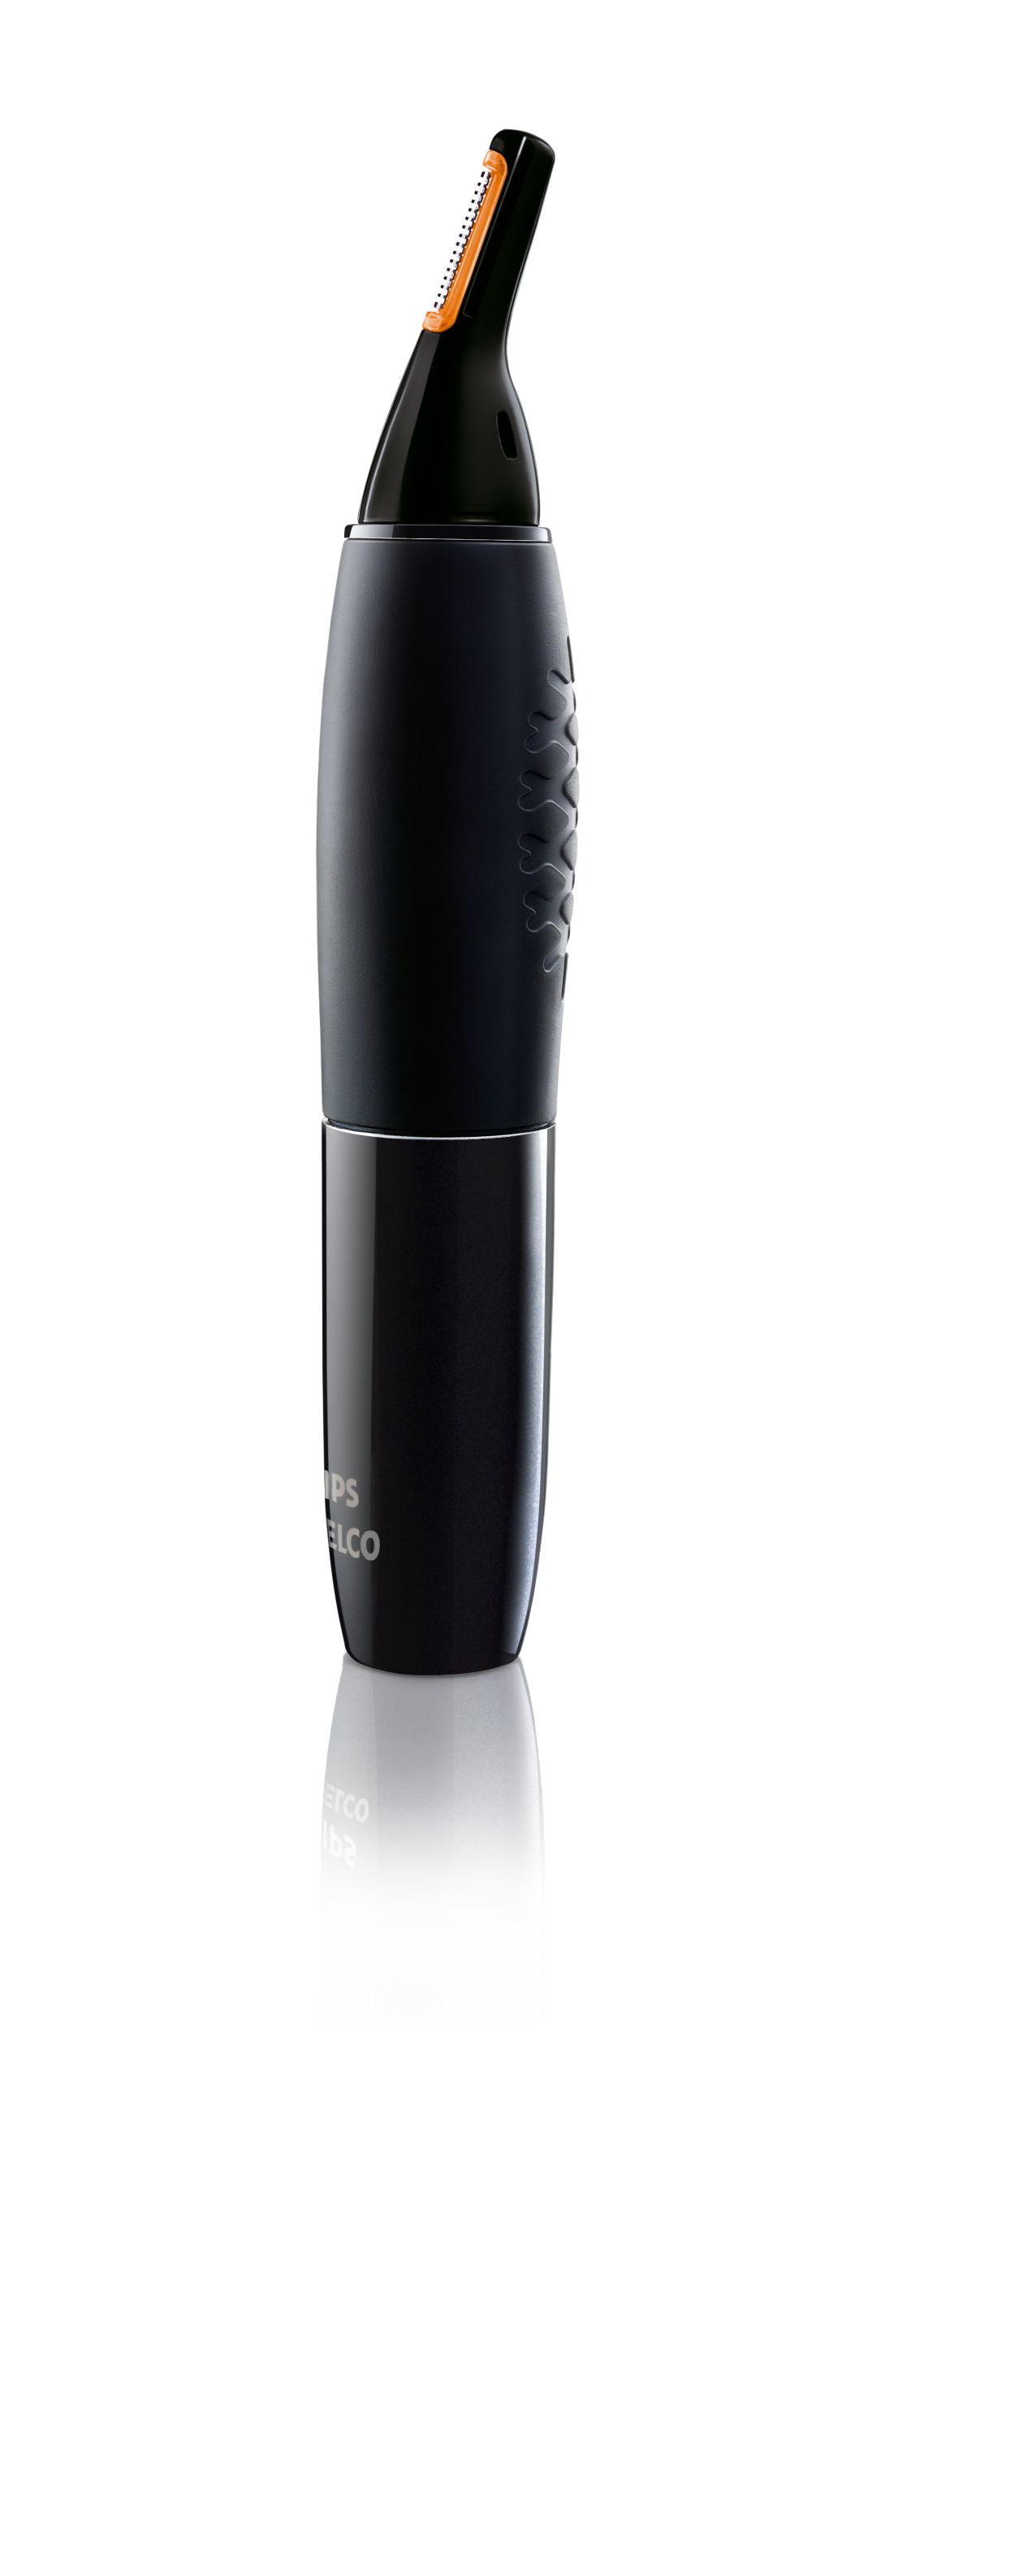 Nose trimmer series 3000 防水鼻毛トリマー NT9105/15 | Philips